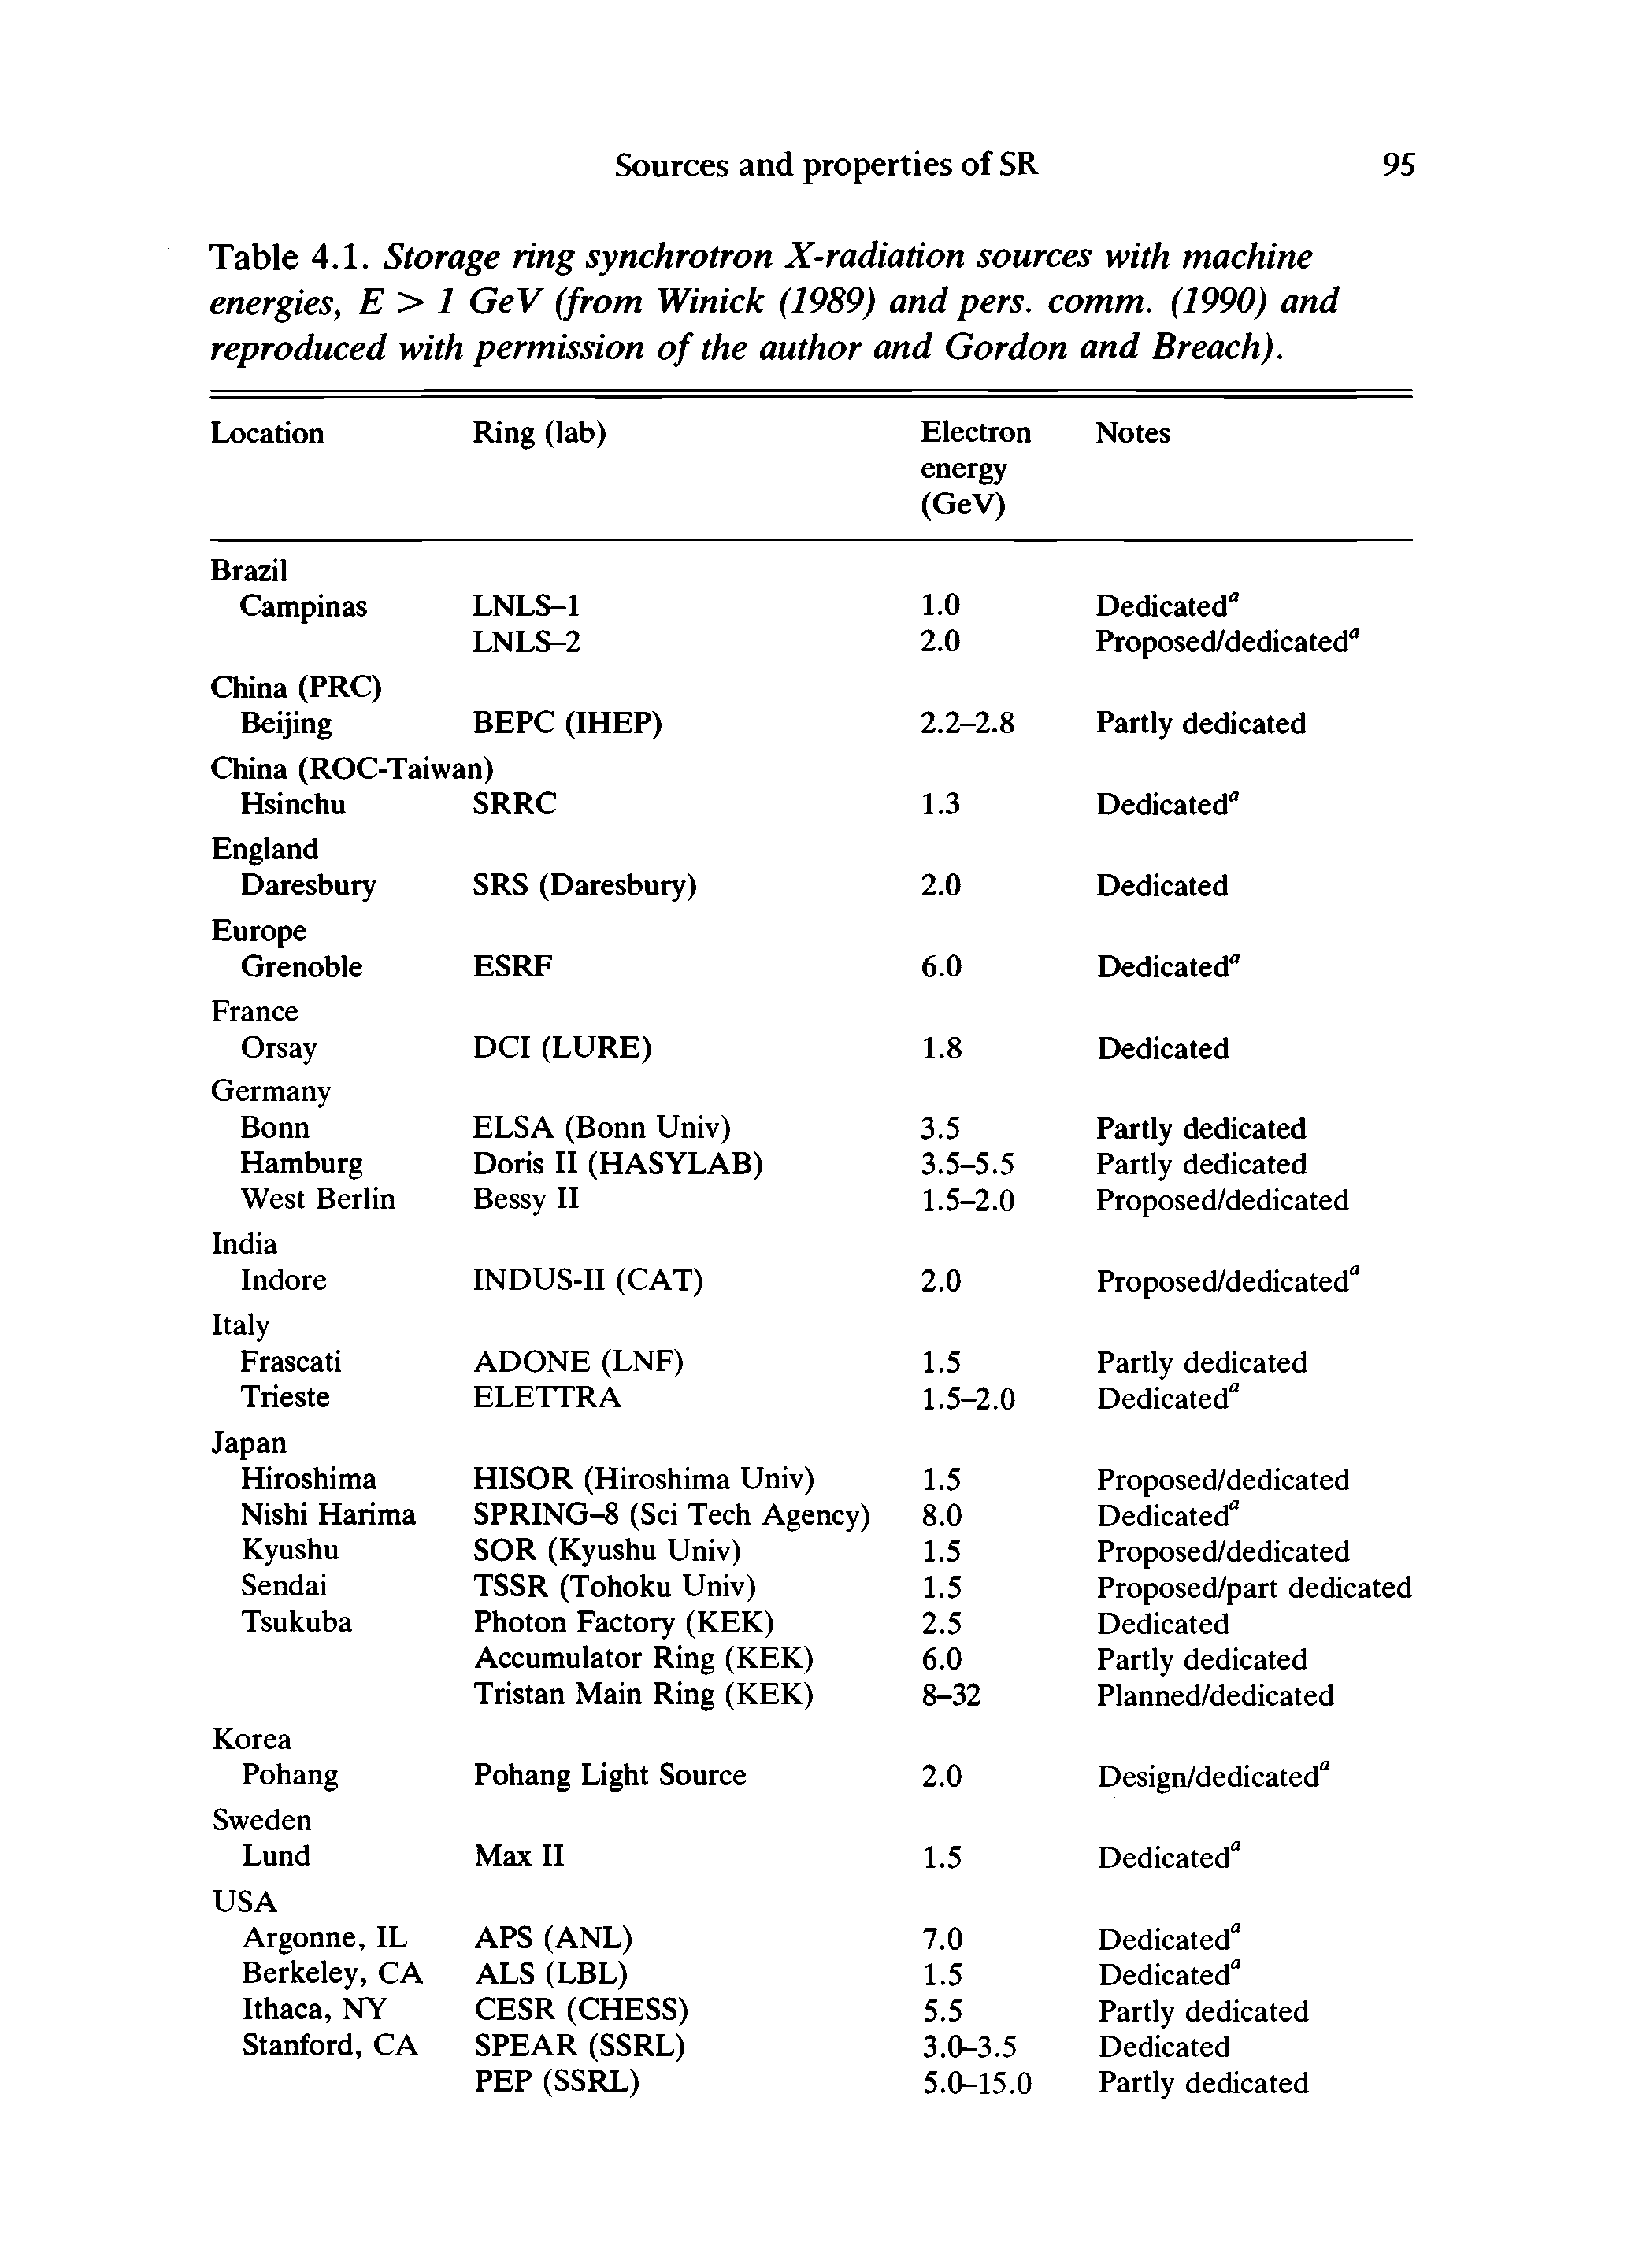 Table 4.1. Storage ring synchrotron X-radiation sources with machine energies, E > 1 GeV (from Winick (1989) and pers. comm. (1990) and reproduced with permission of the author and Gordon and Breach).